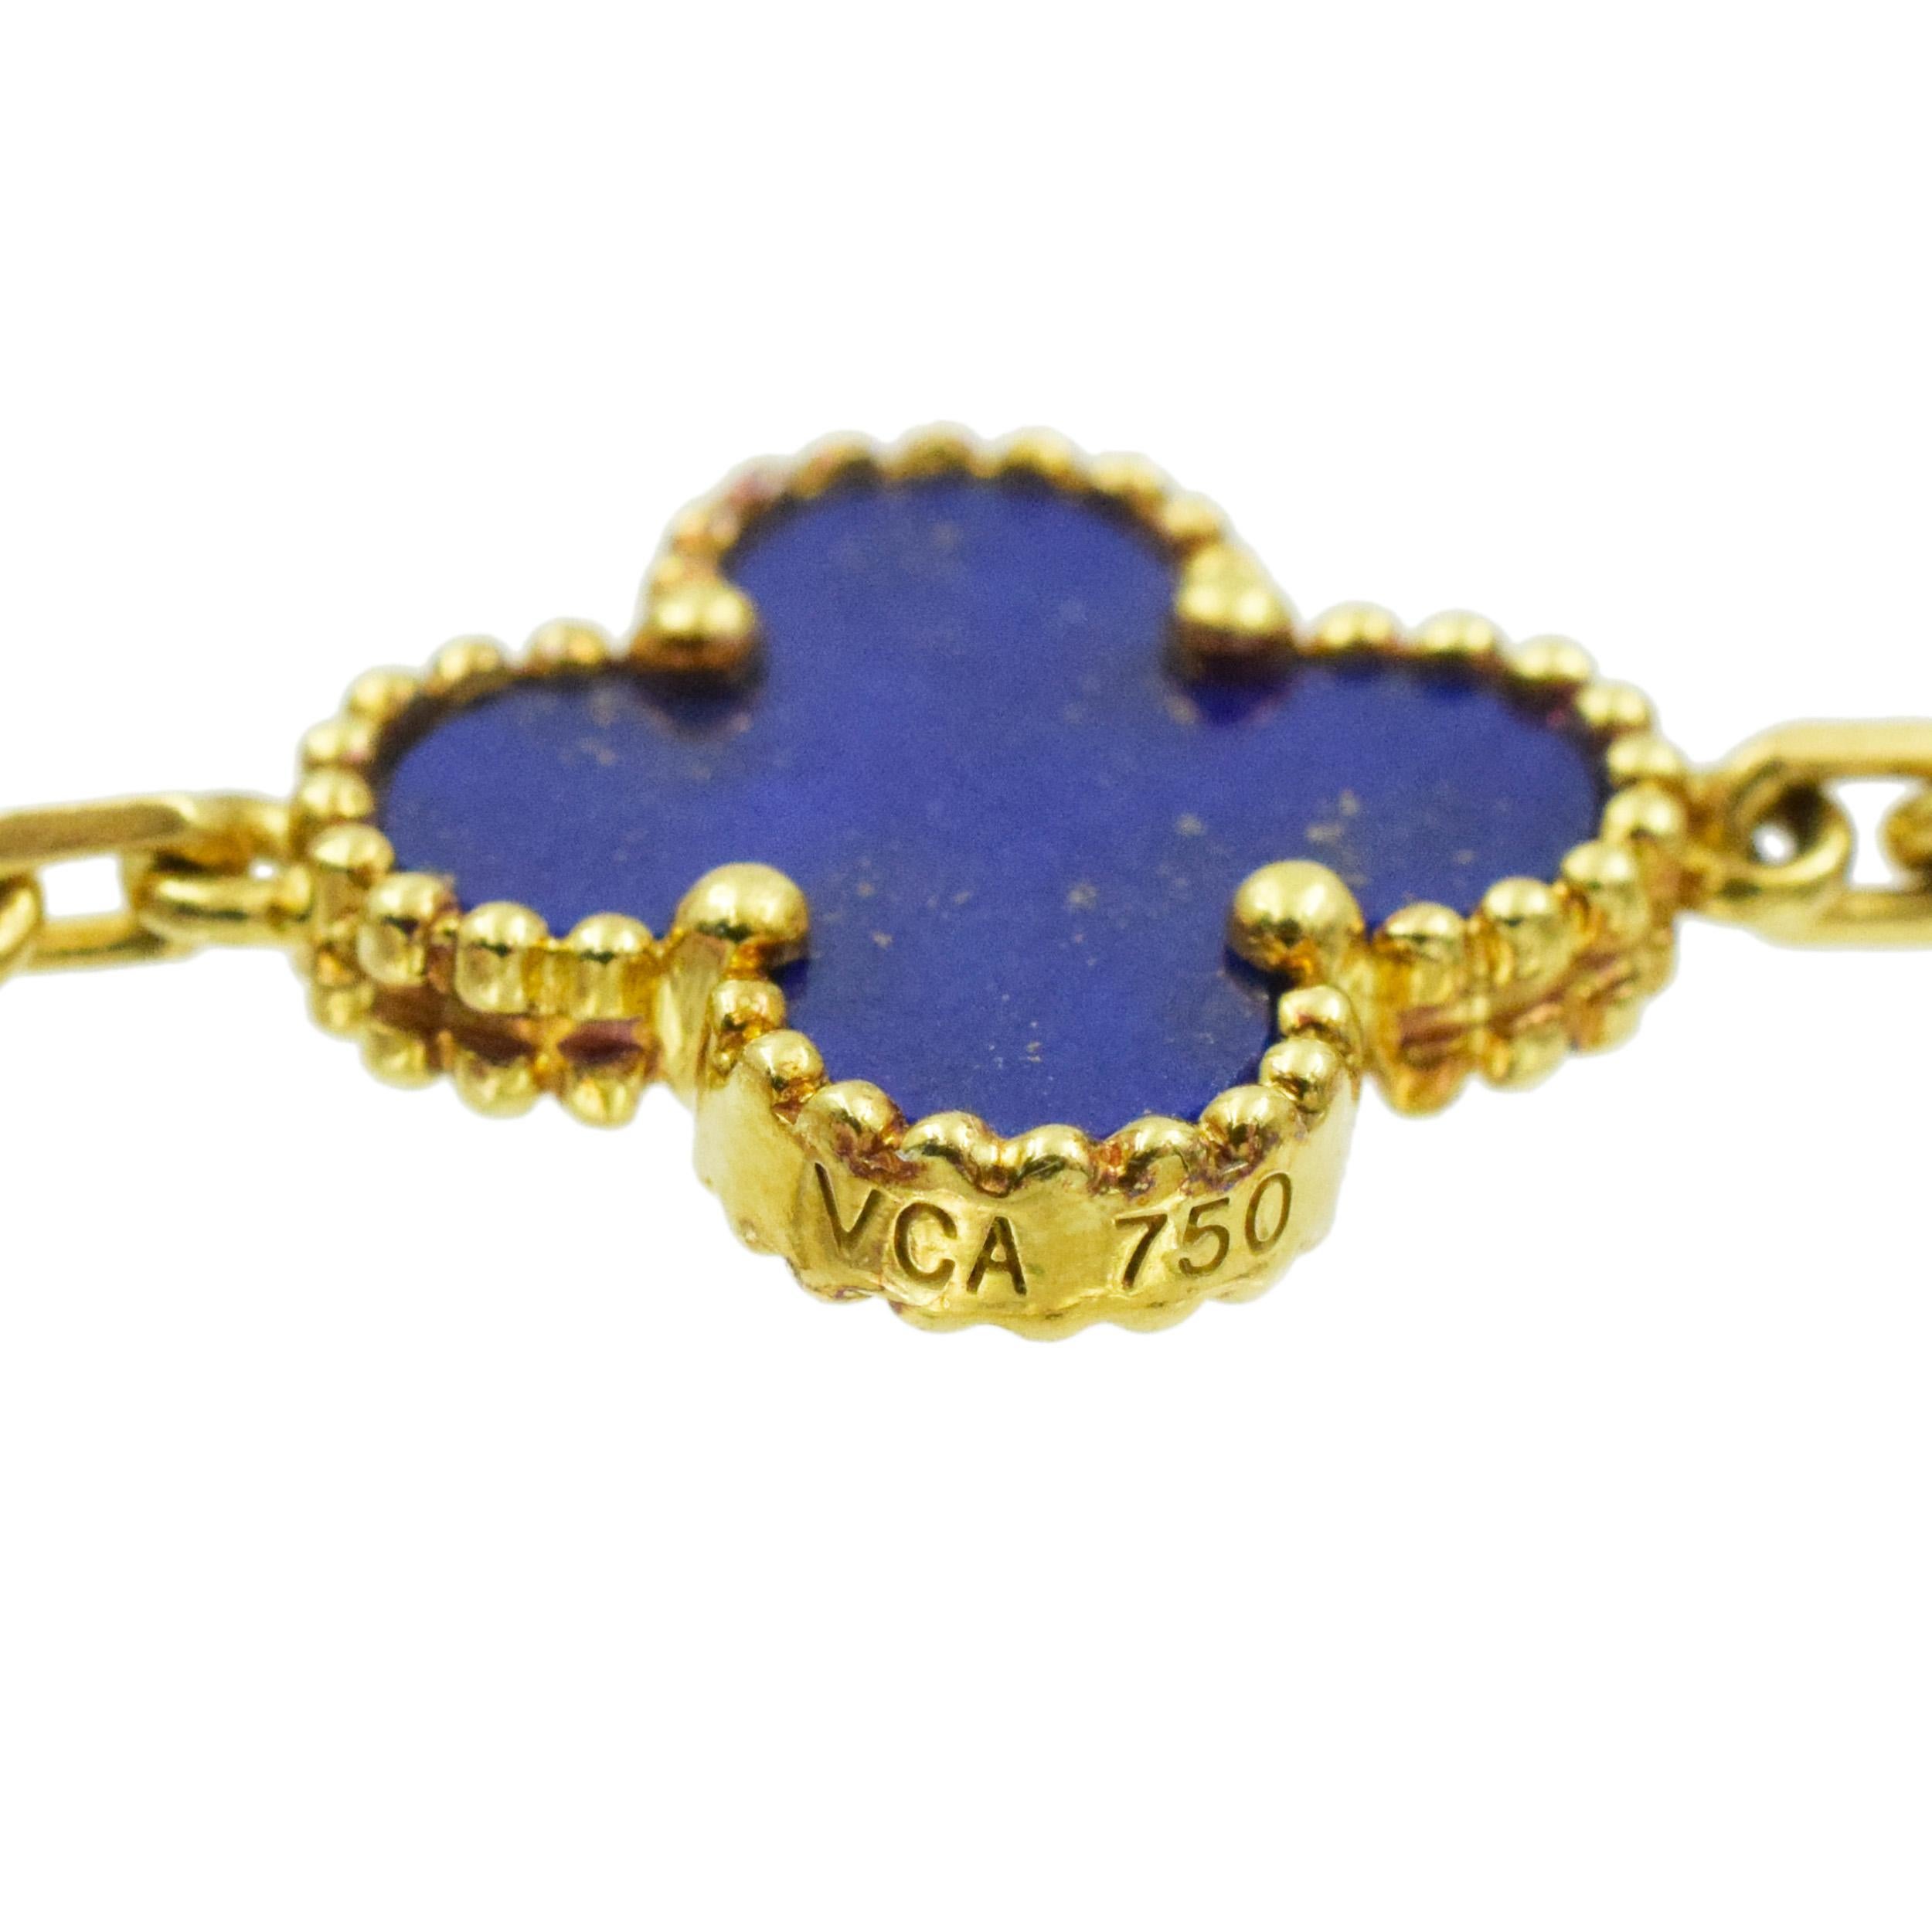 Round Cut VCA Lapis Lazuli Vintage Alhambra Necklace in 18k yellow gold. For Sale